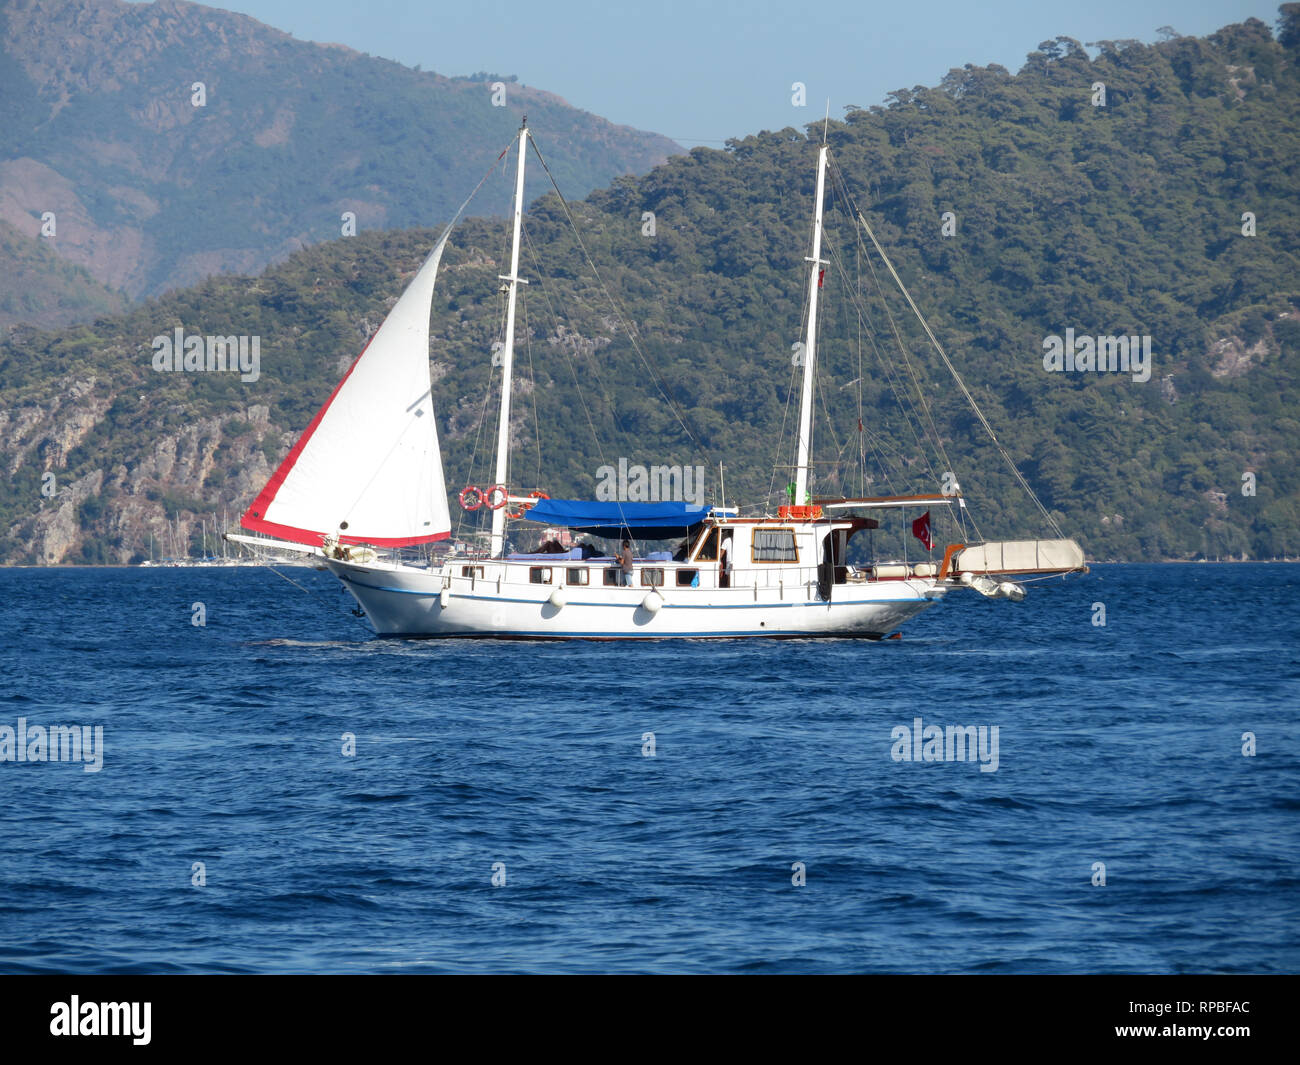 Yacht with tourists sailing on background of mountain islands in the Aegean sea. Picturesque mediterranean landscape with white sailing boat Stock Photo